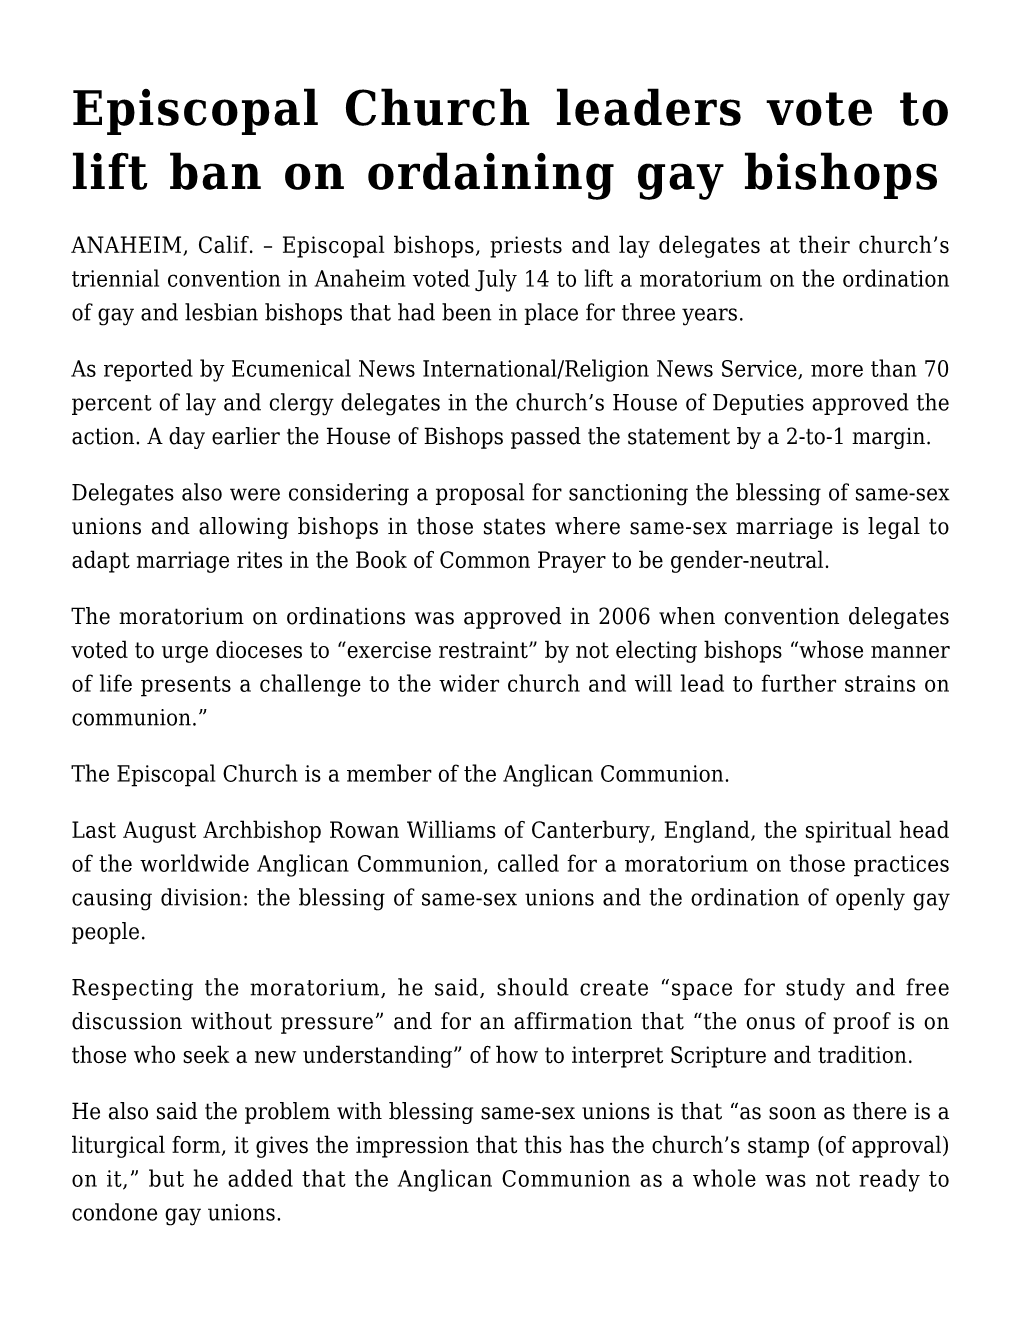 Episcopal Church Leaders Vote to Lift Ban on Ordaining Gay Bishops